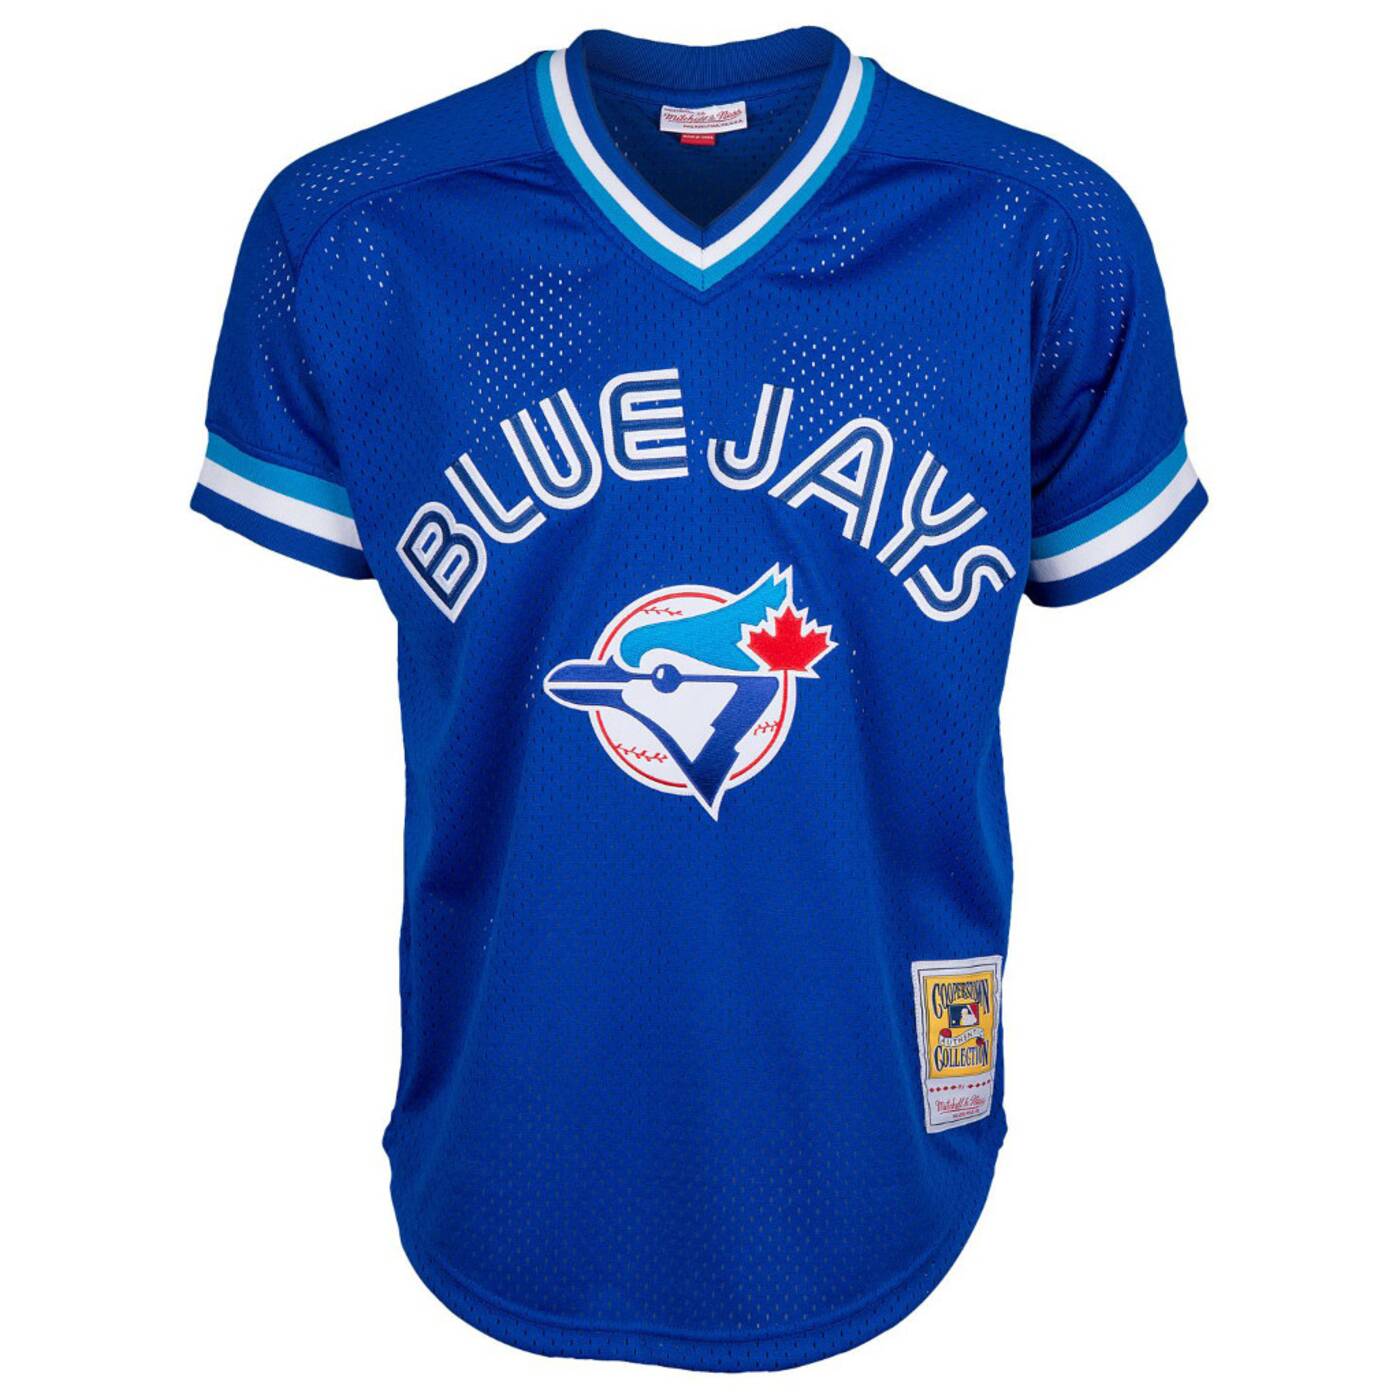 Where to Get Your Alternative Toronto Blue Jays Gear – On the Danforth